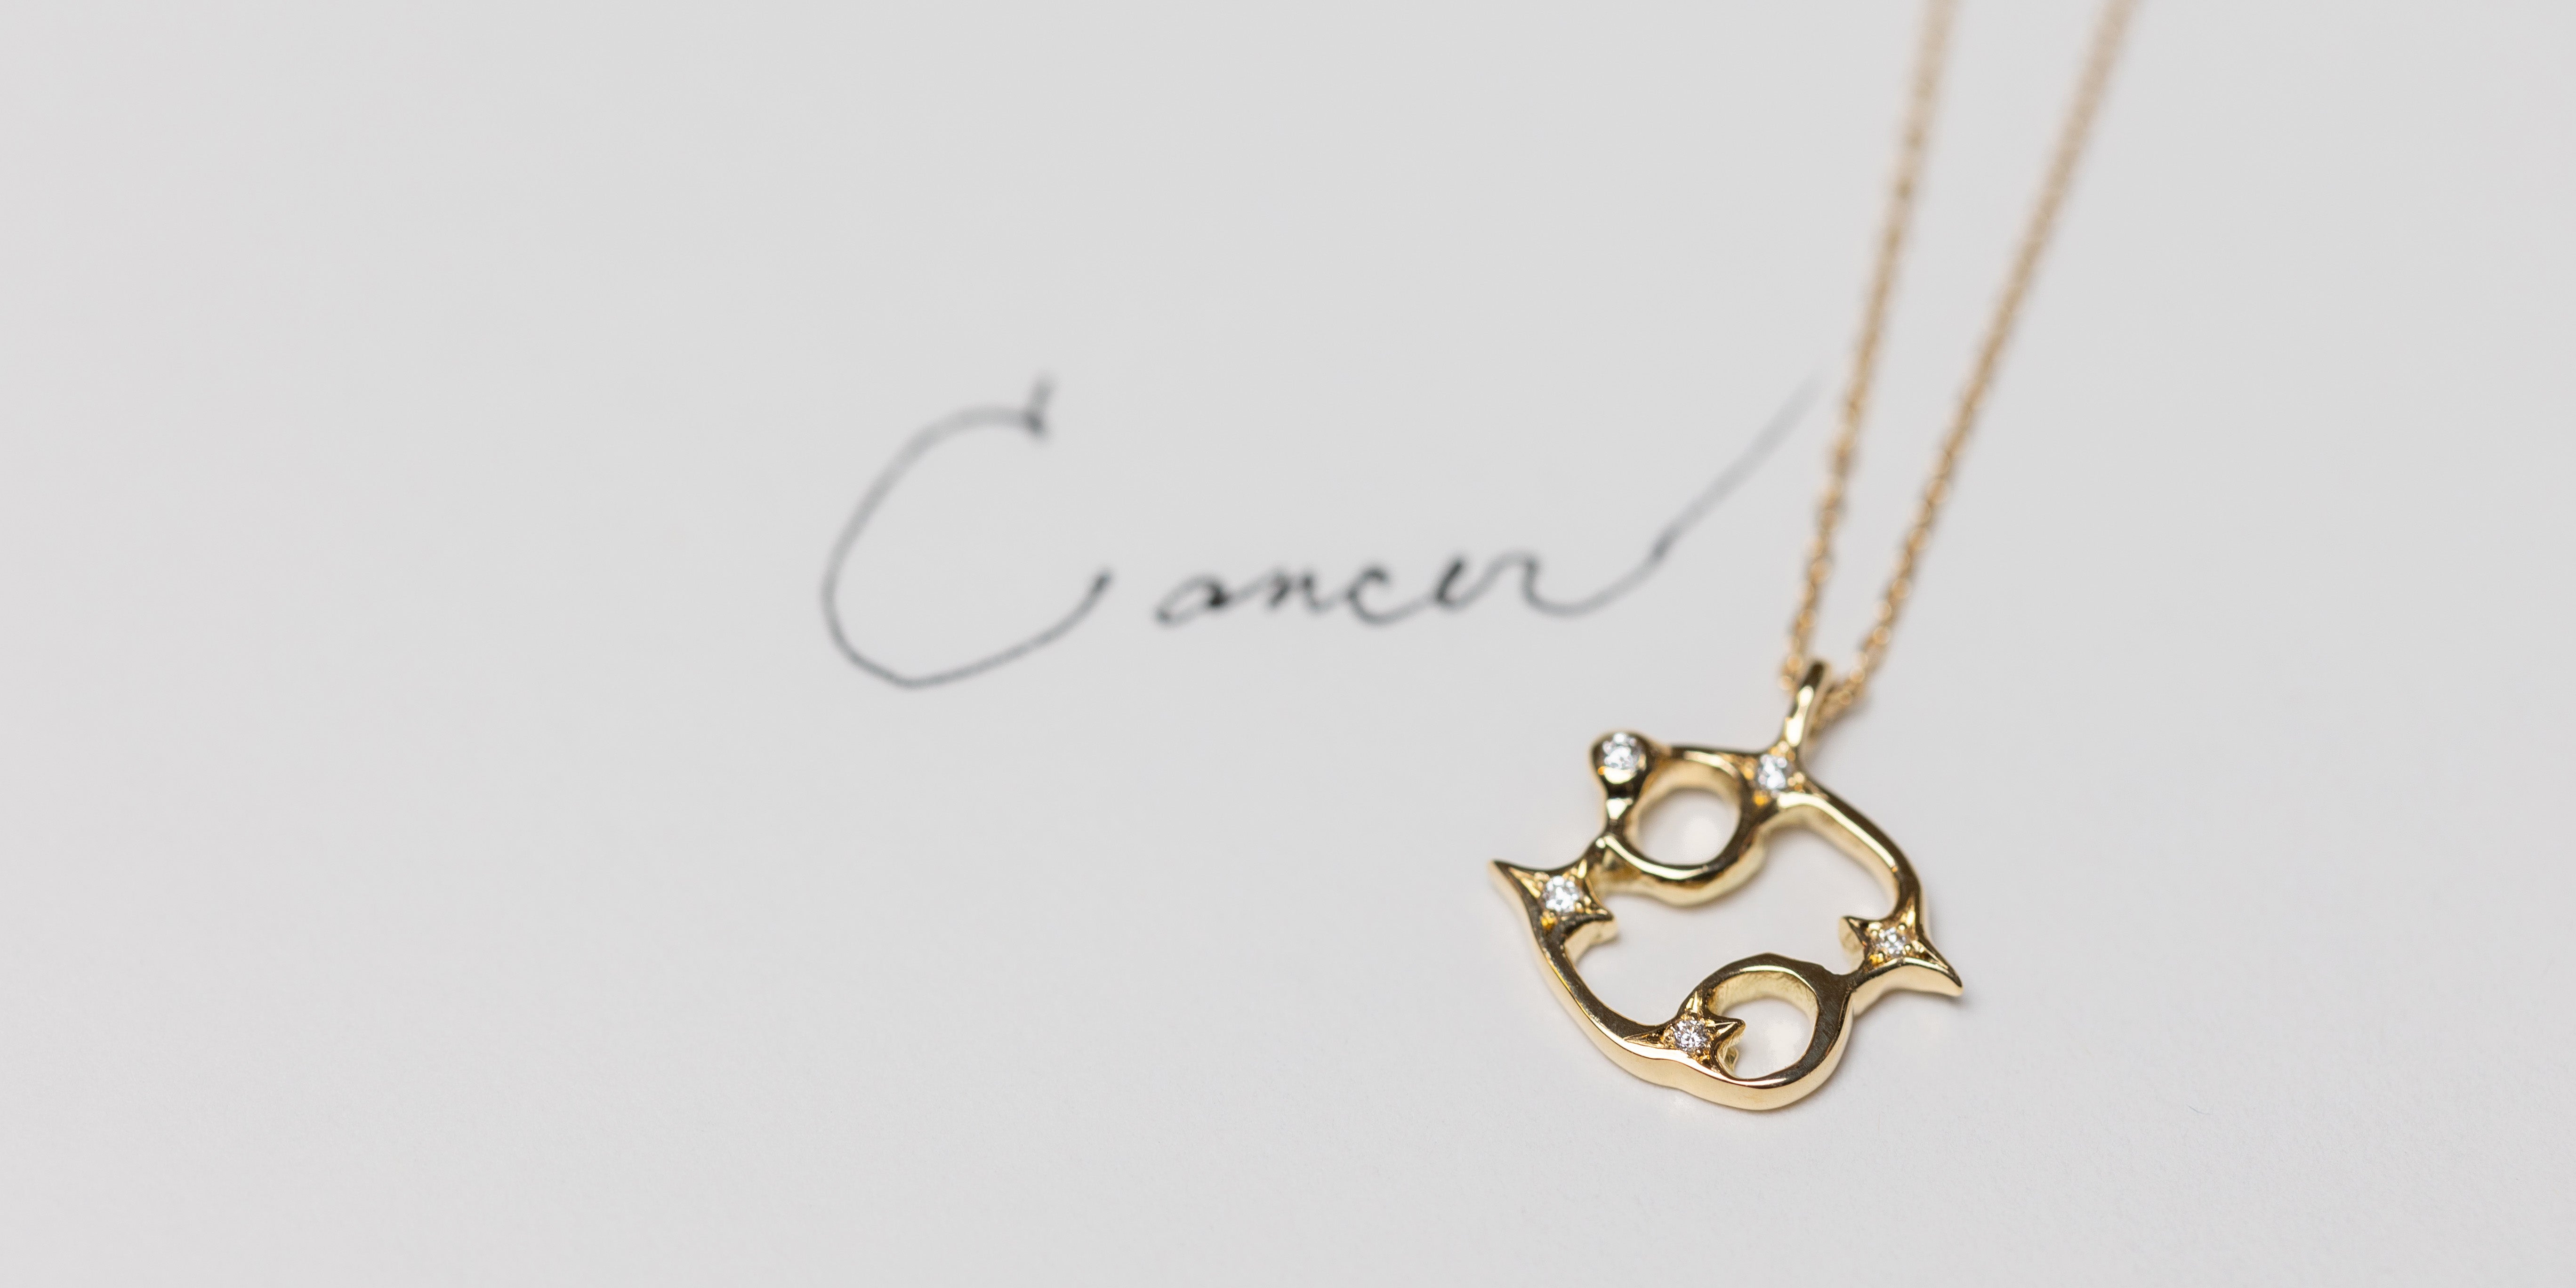 Twinkling Cancer Necklace